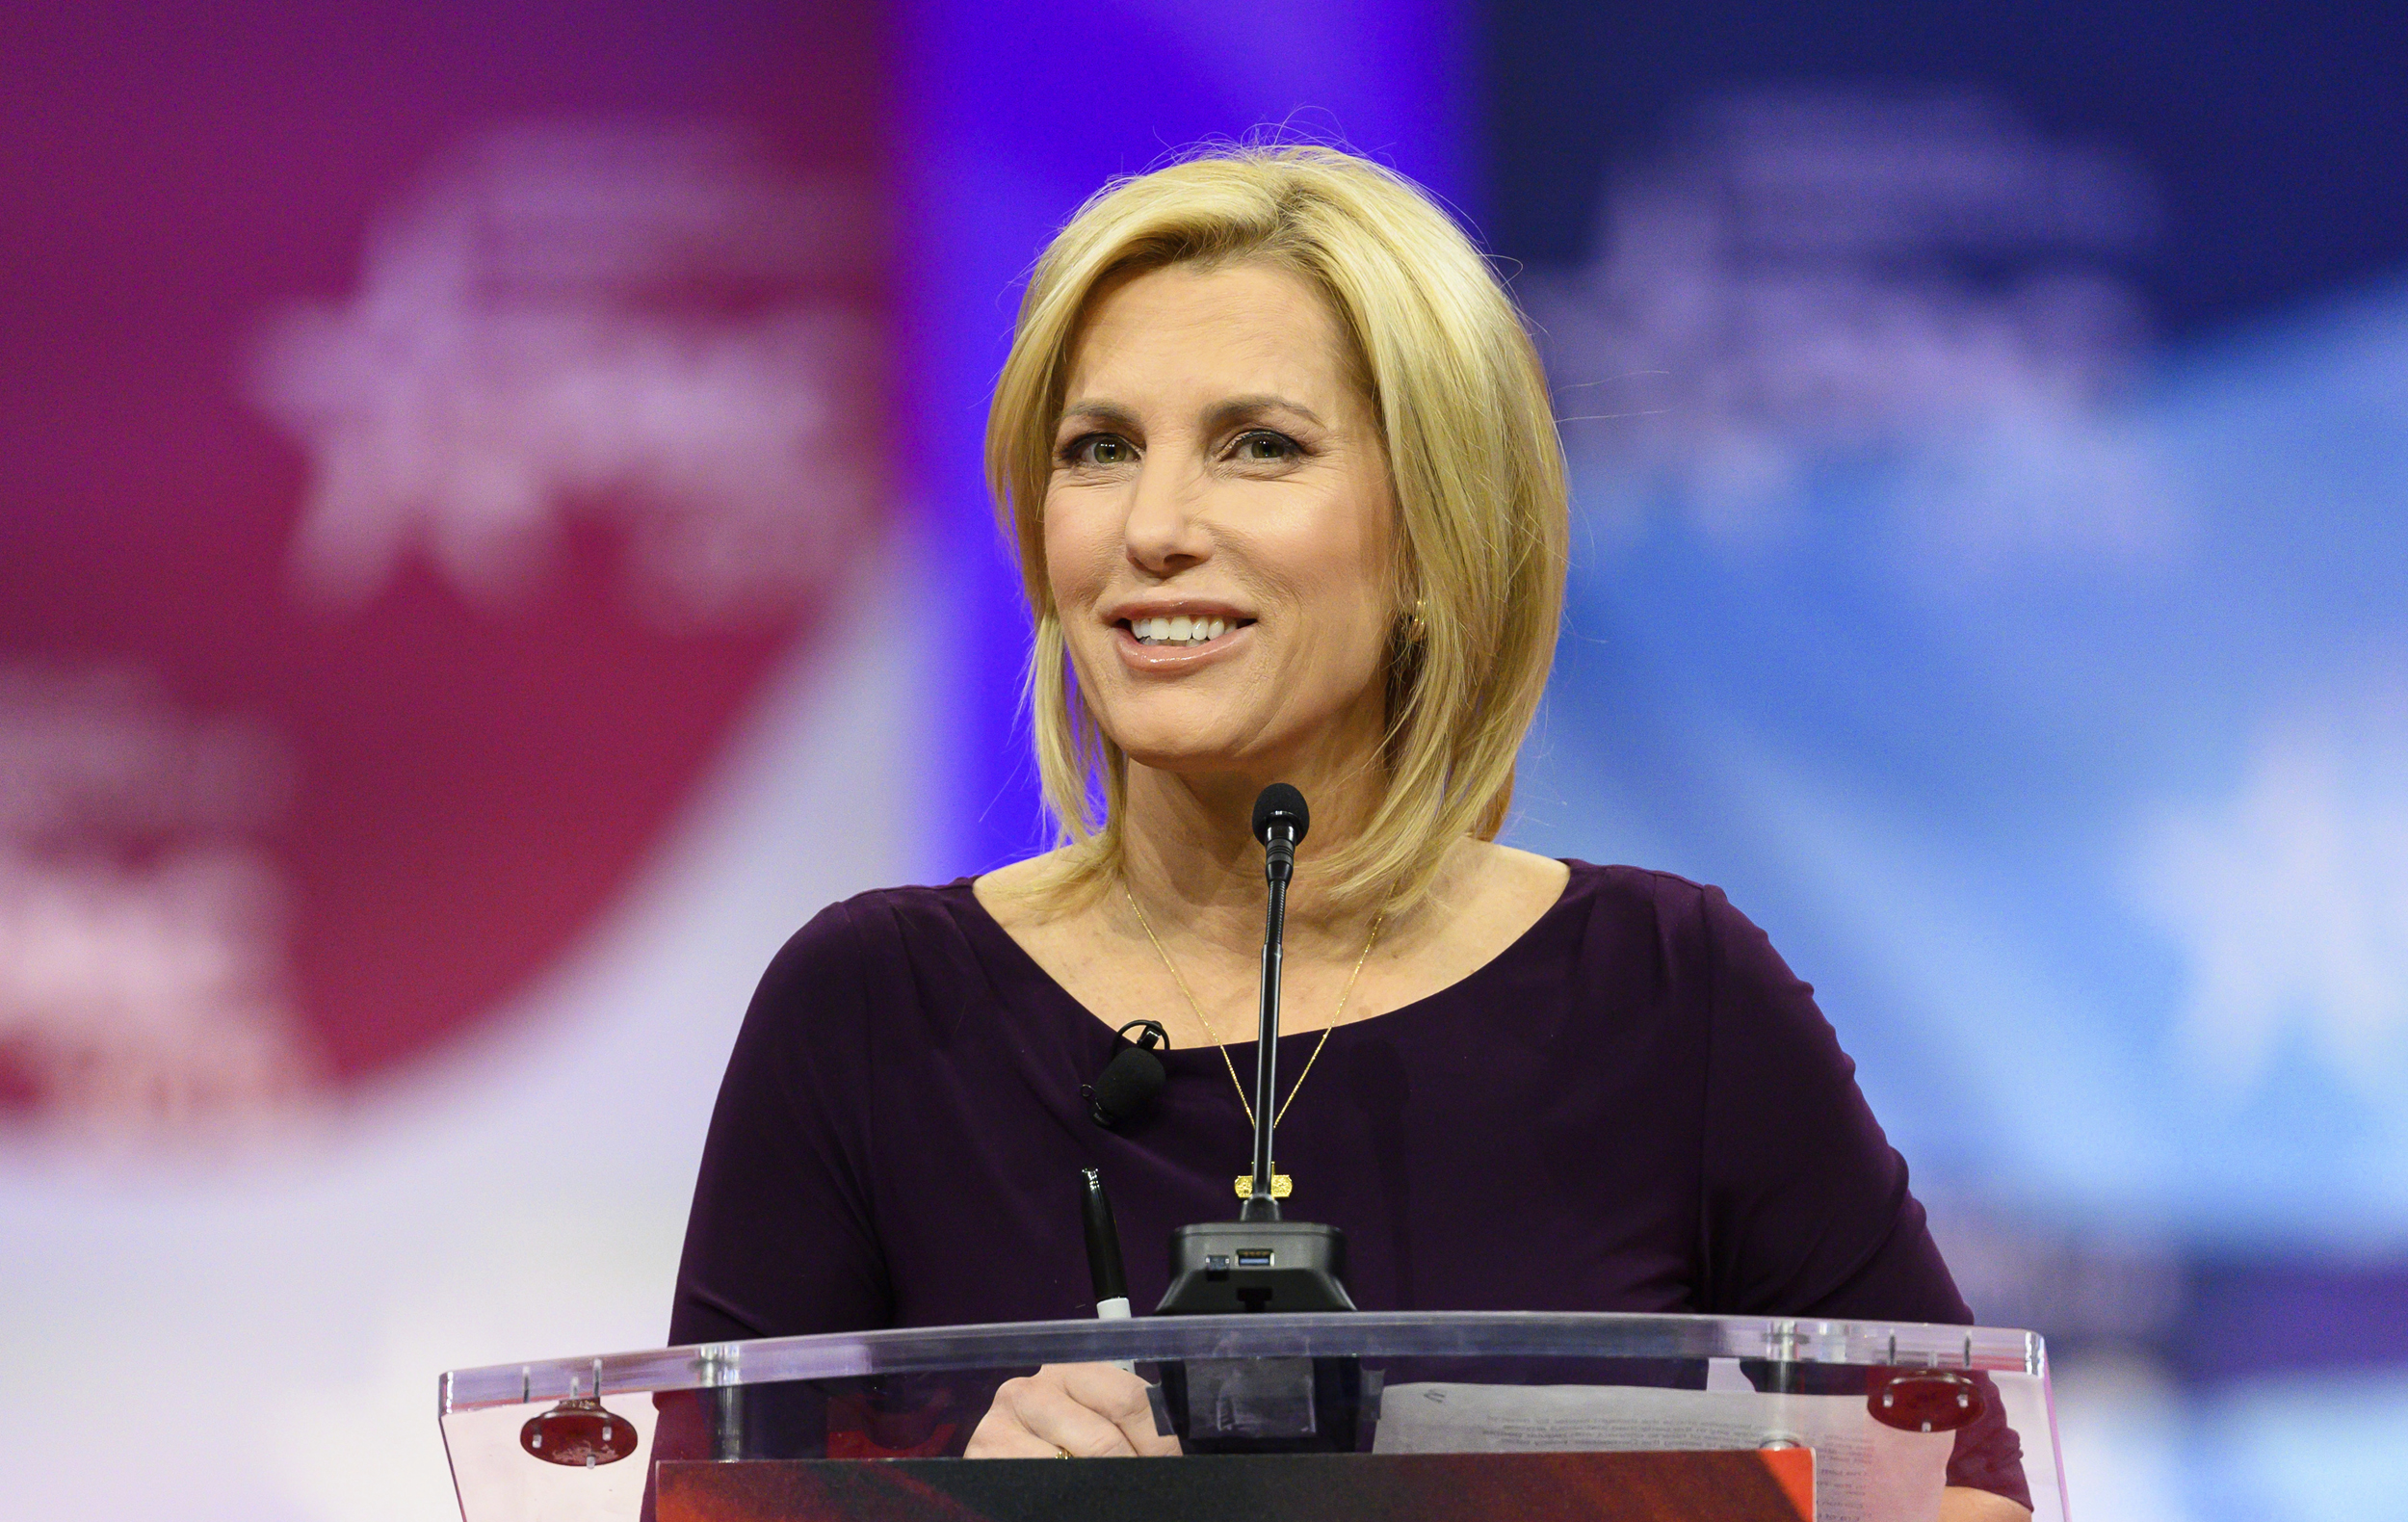 The Confusion Unfolds for Laura Ingraham